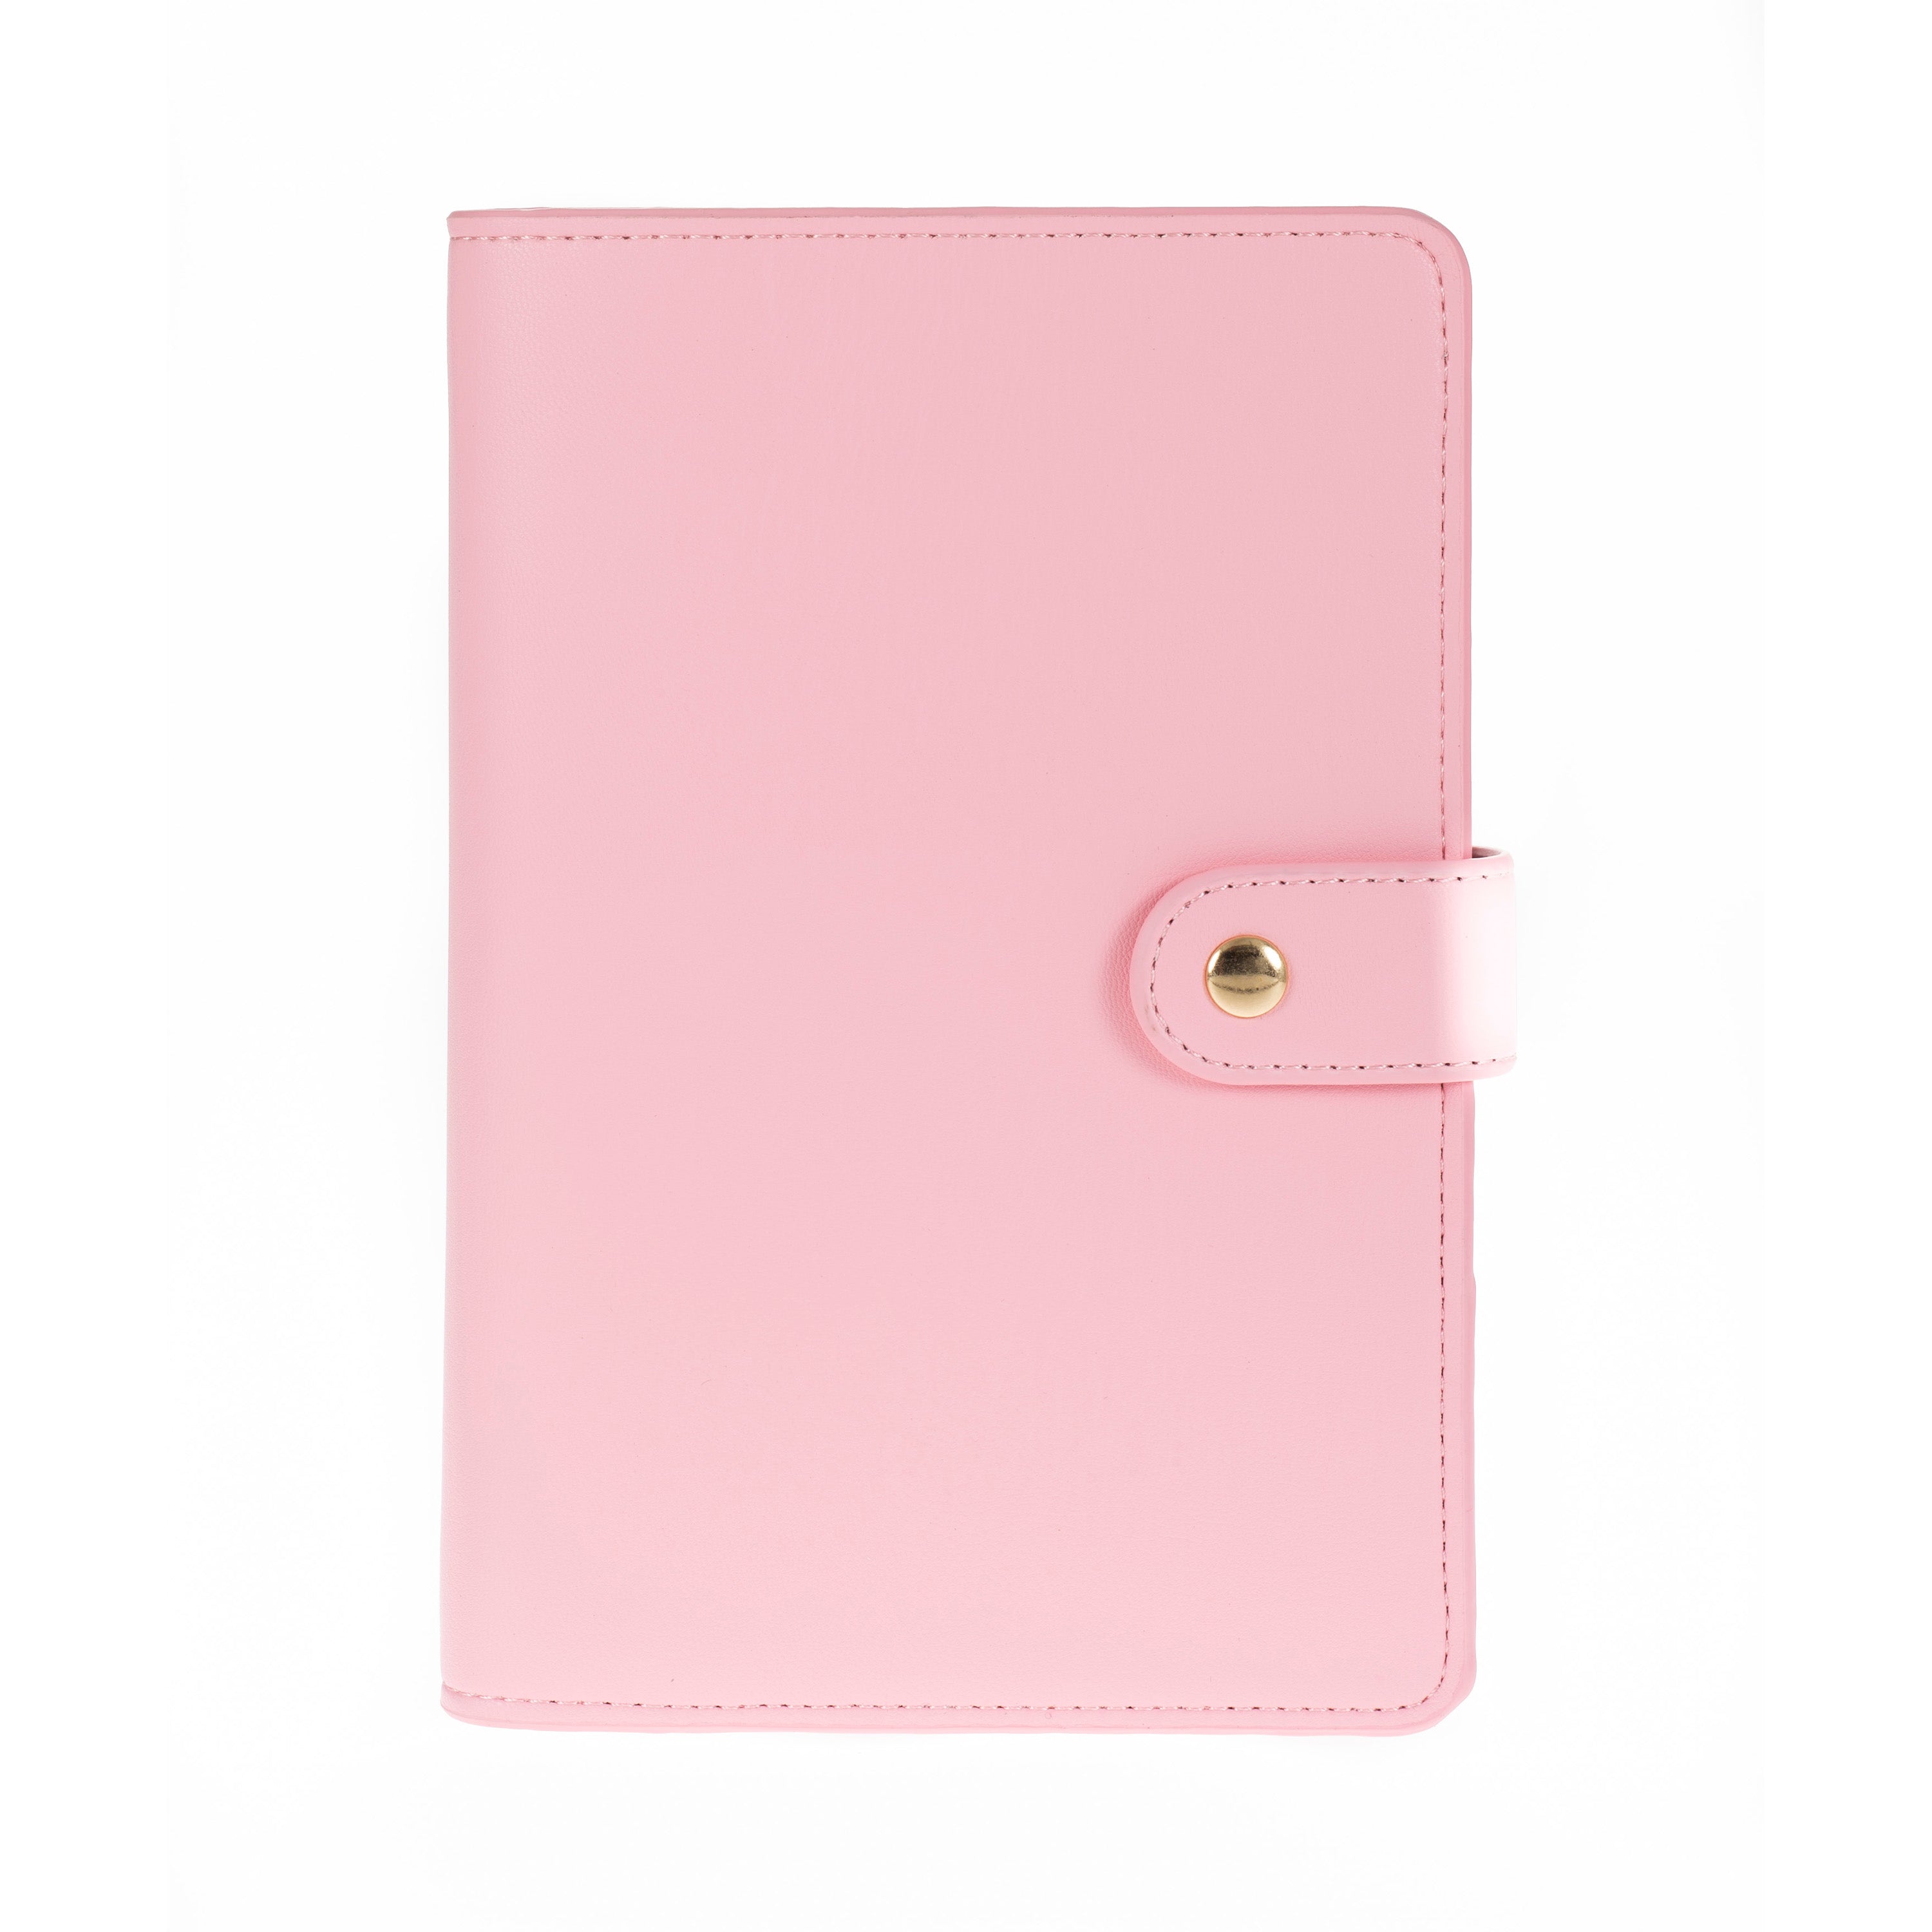 DayPlanner - Hard Cover Fashion - Personal Size - Collins Debden